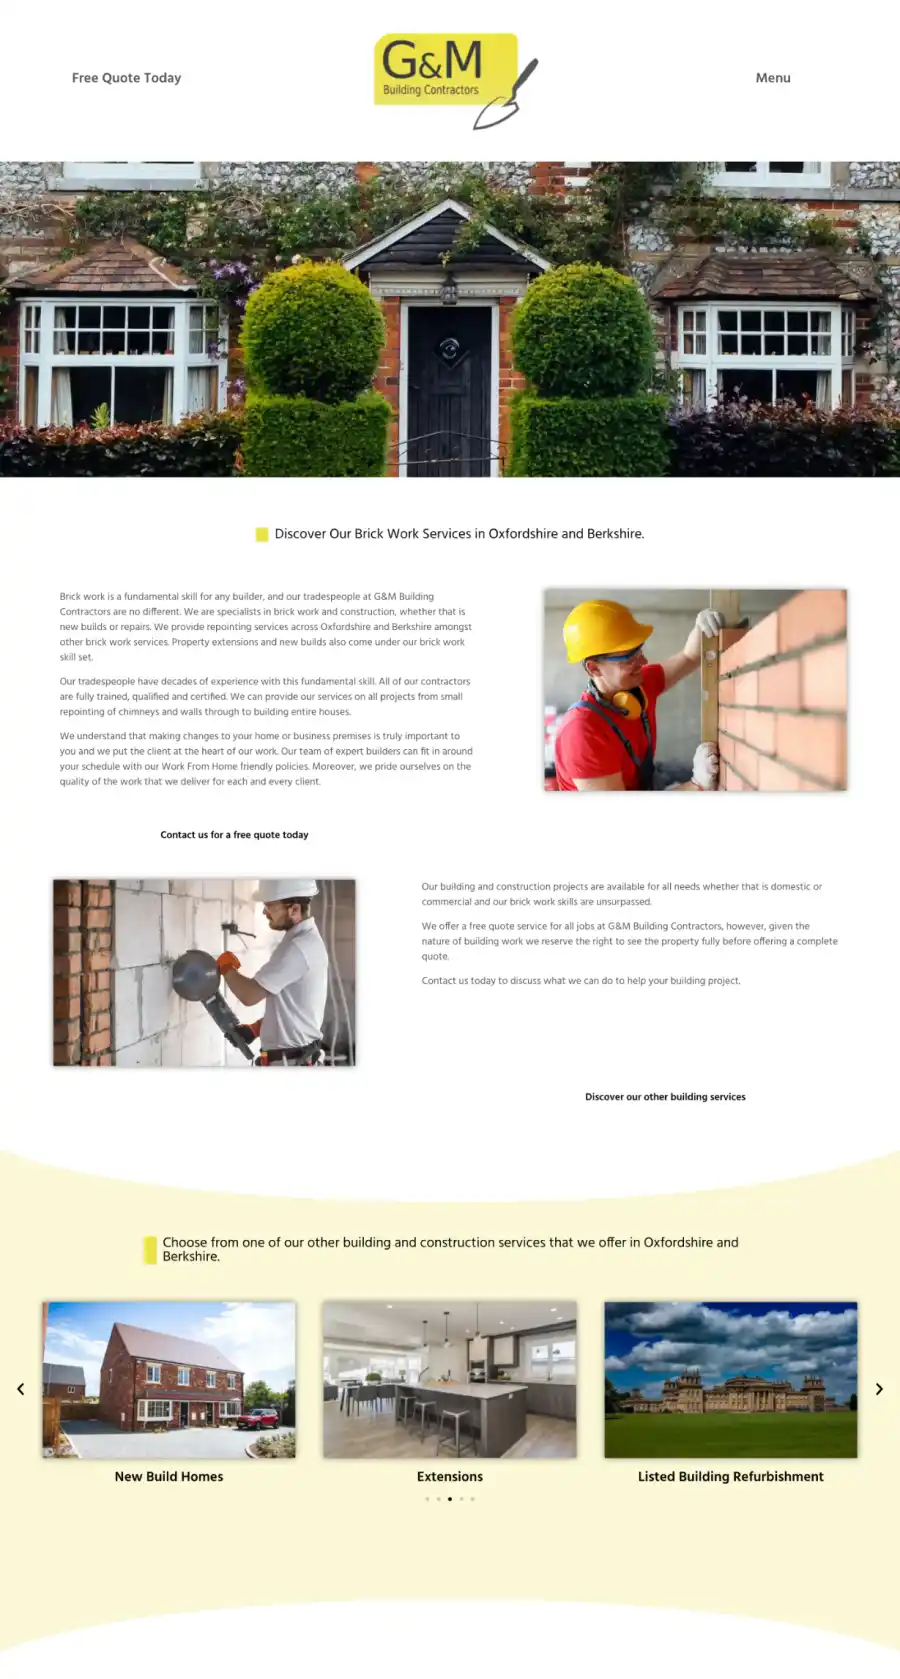 A web design page for the building services offered by G&M Building Contractors. This shows bricklaying services and has links to their other services at the bottom.